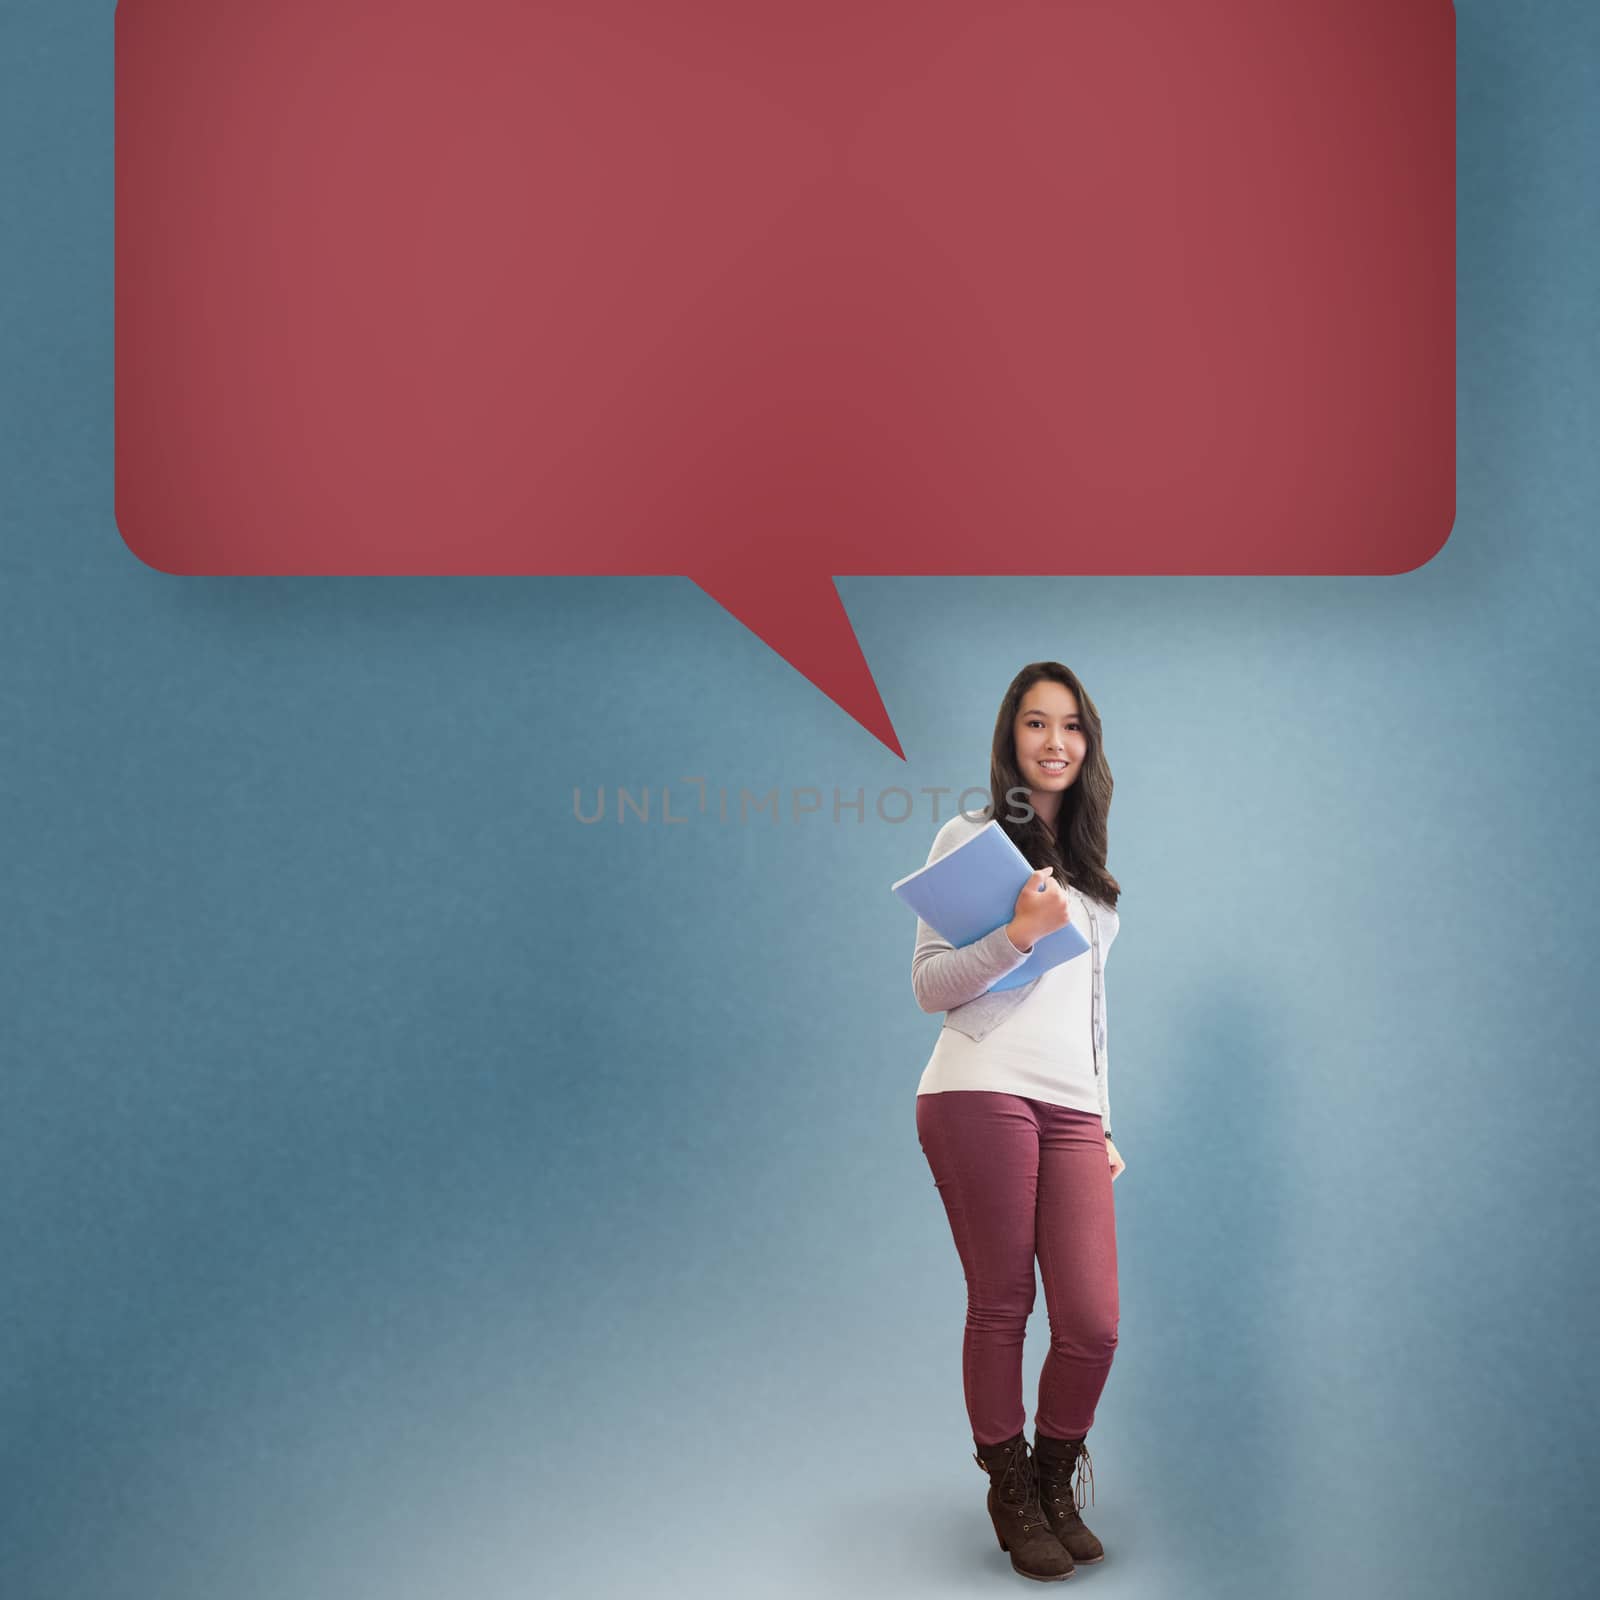 Smiling student holding textbook with speech bubble against blue background with vignette